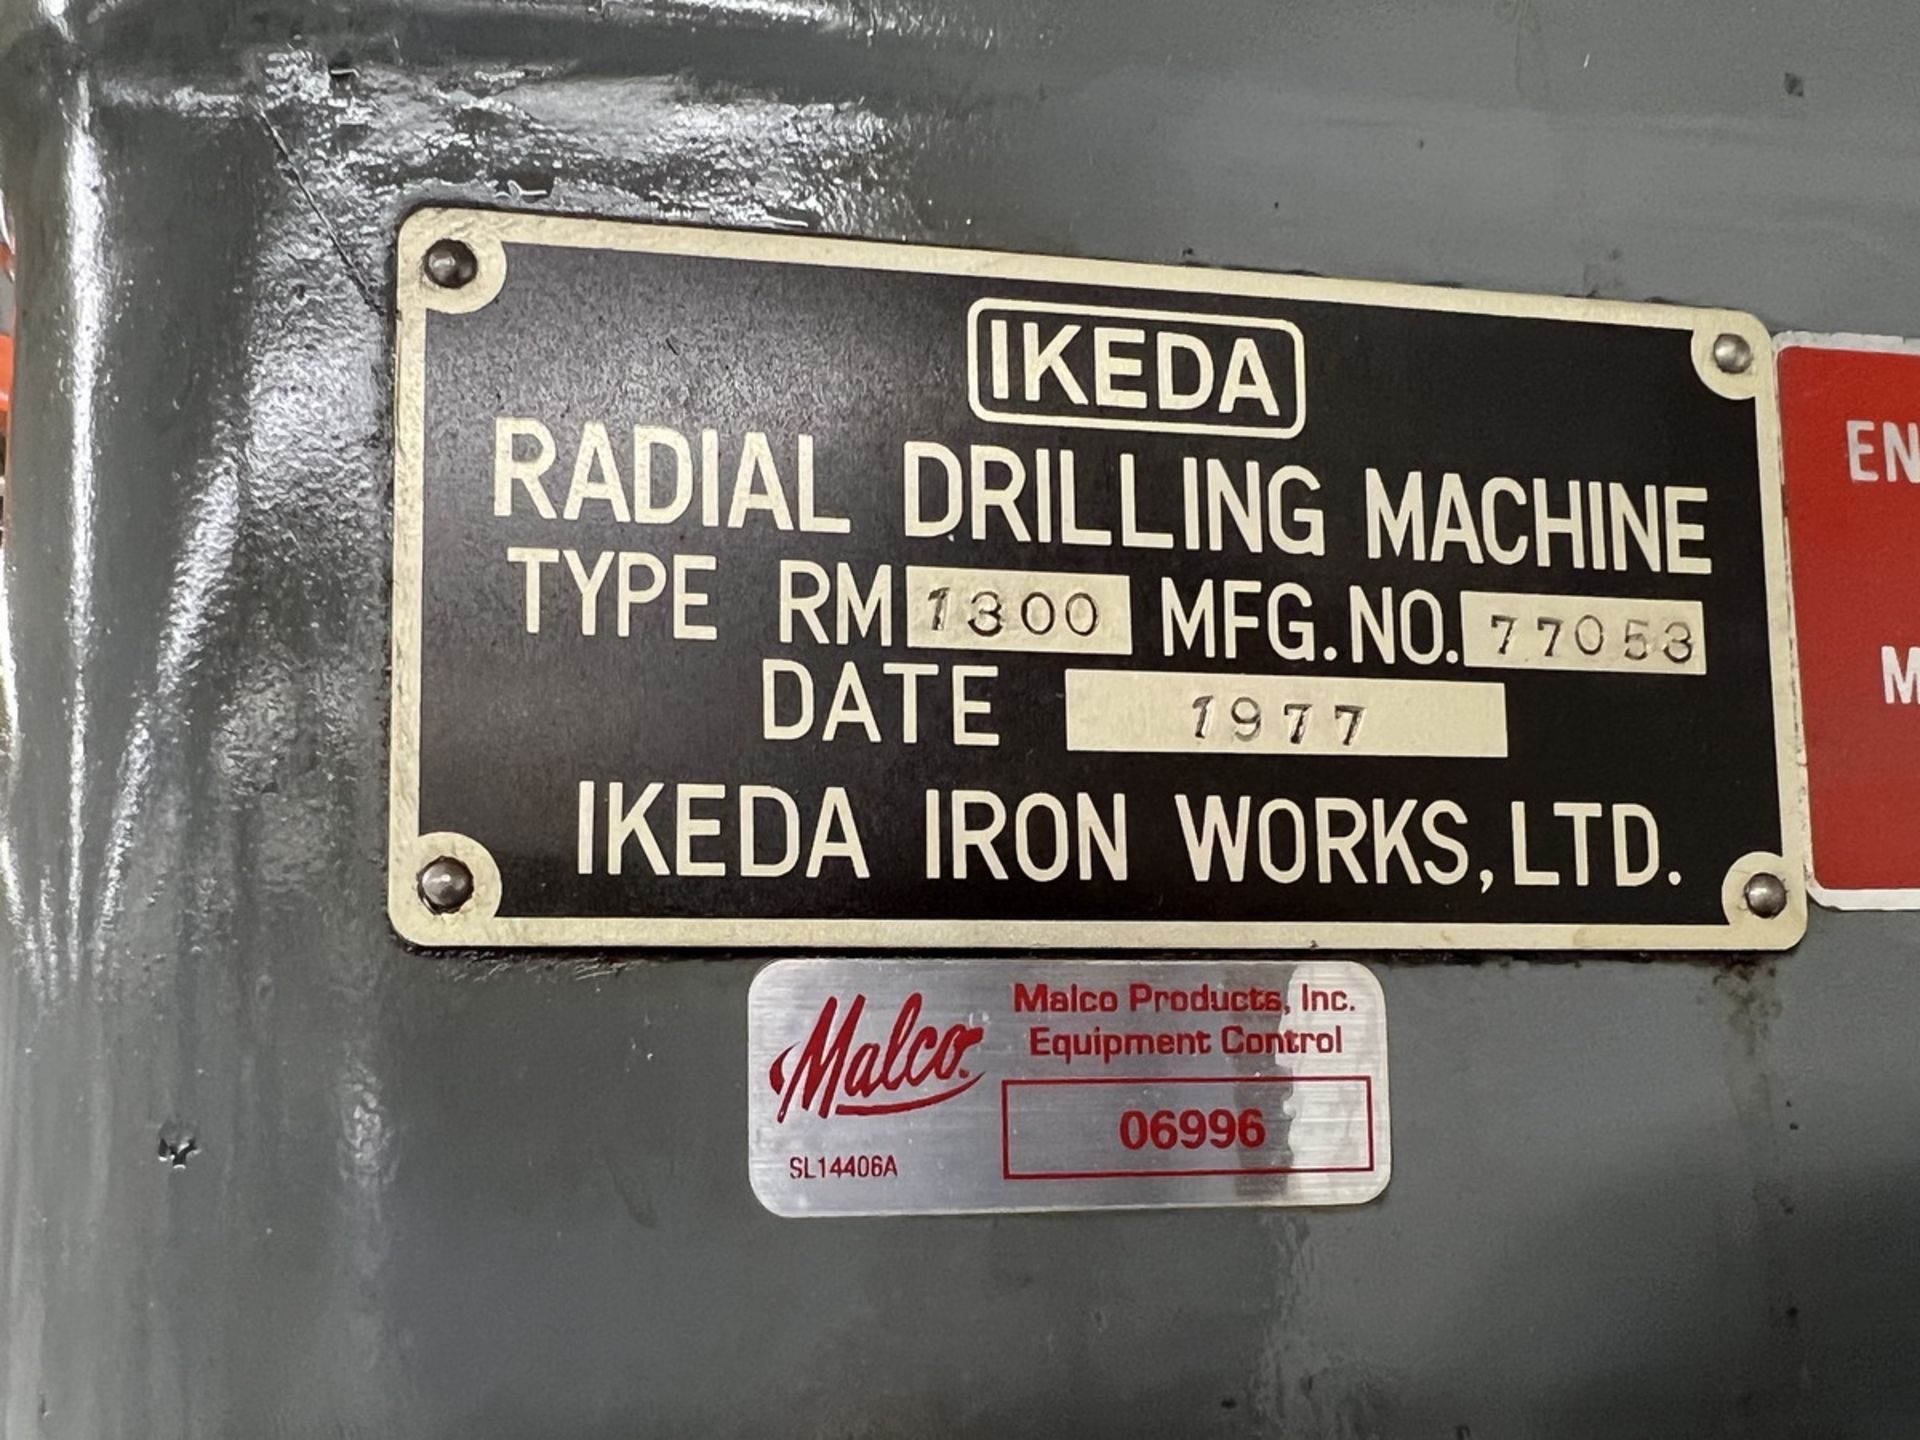 1977 Ikeda Iron Works Type RM1300 Radial Arm Drill - Image 8 of 12